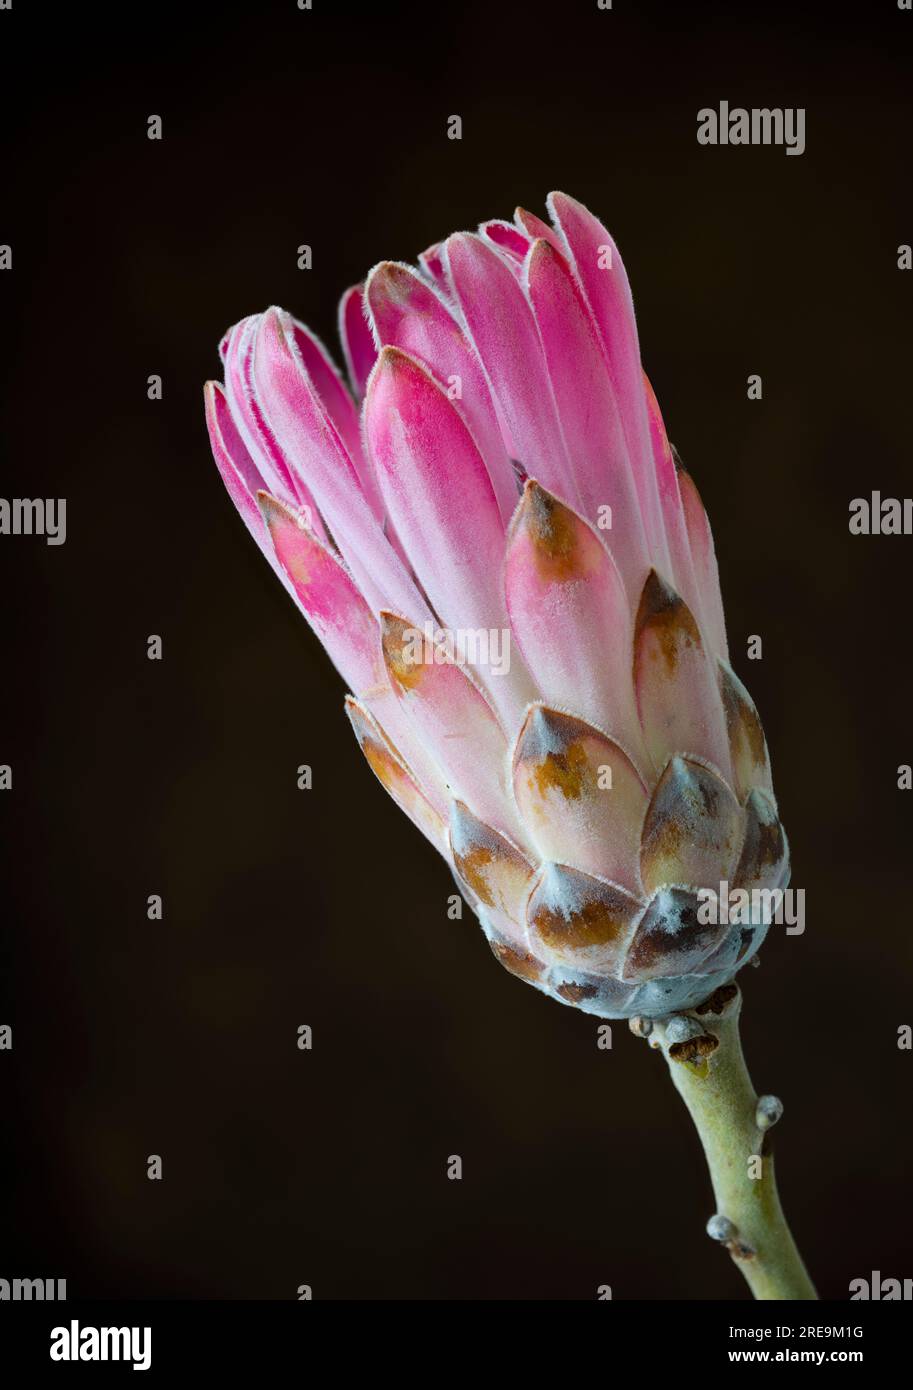 A spectacular and highly unusual flower of a Protea plant, (Protea aristata), photographed against a plain black background Stock Photo